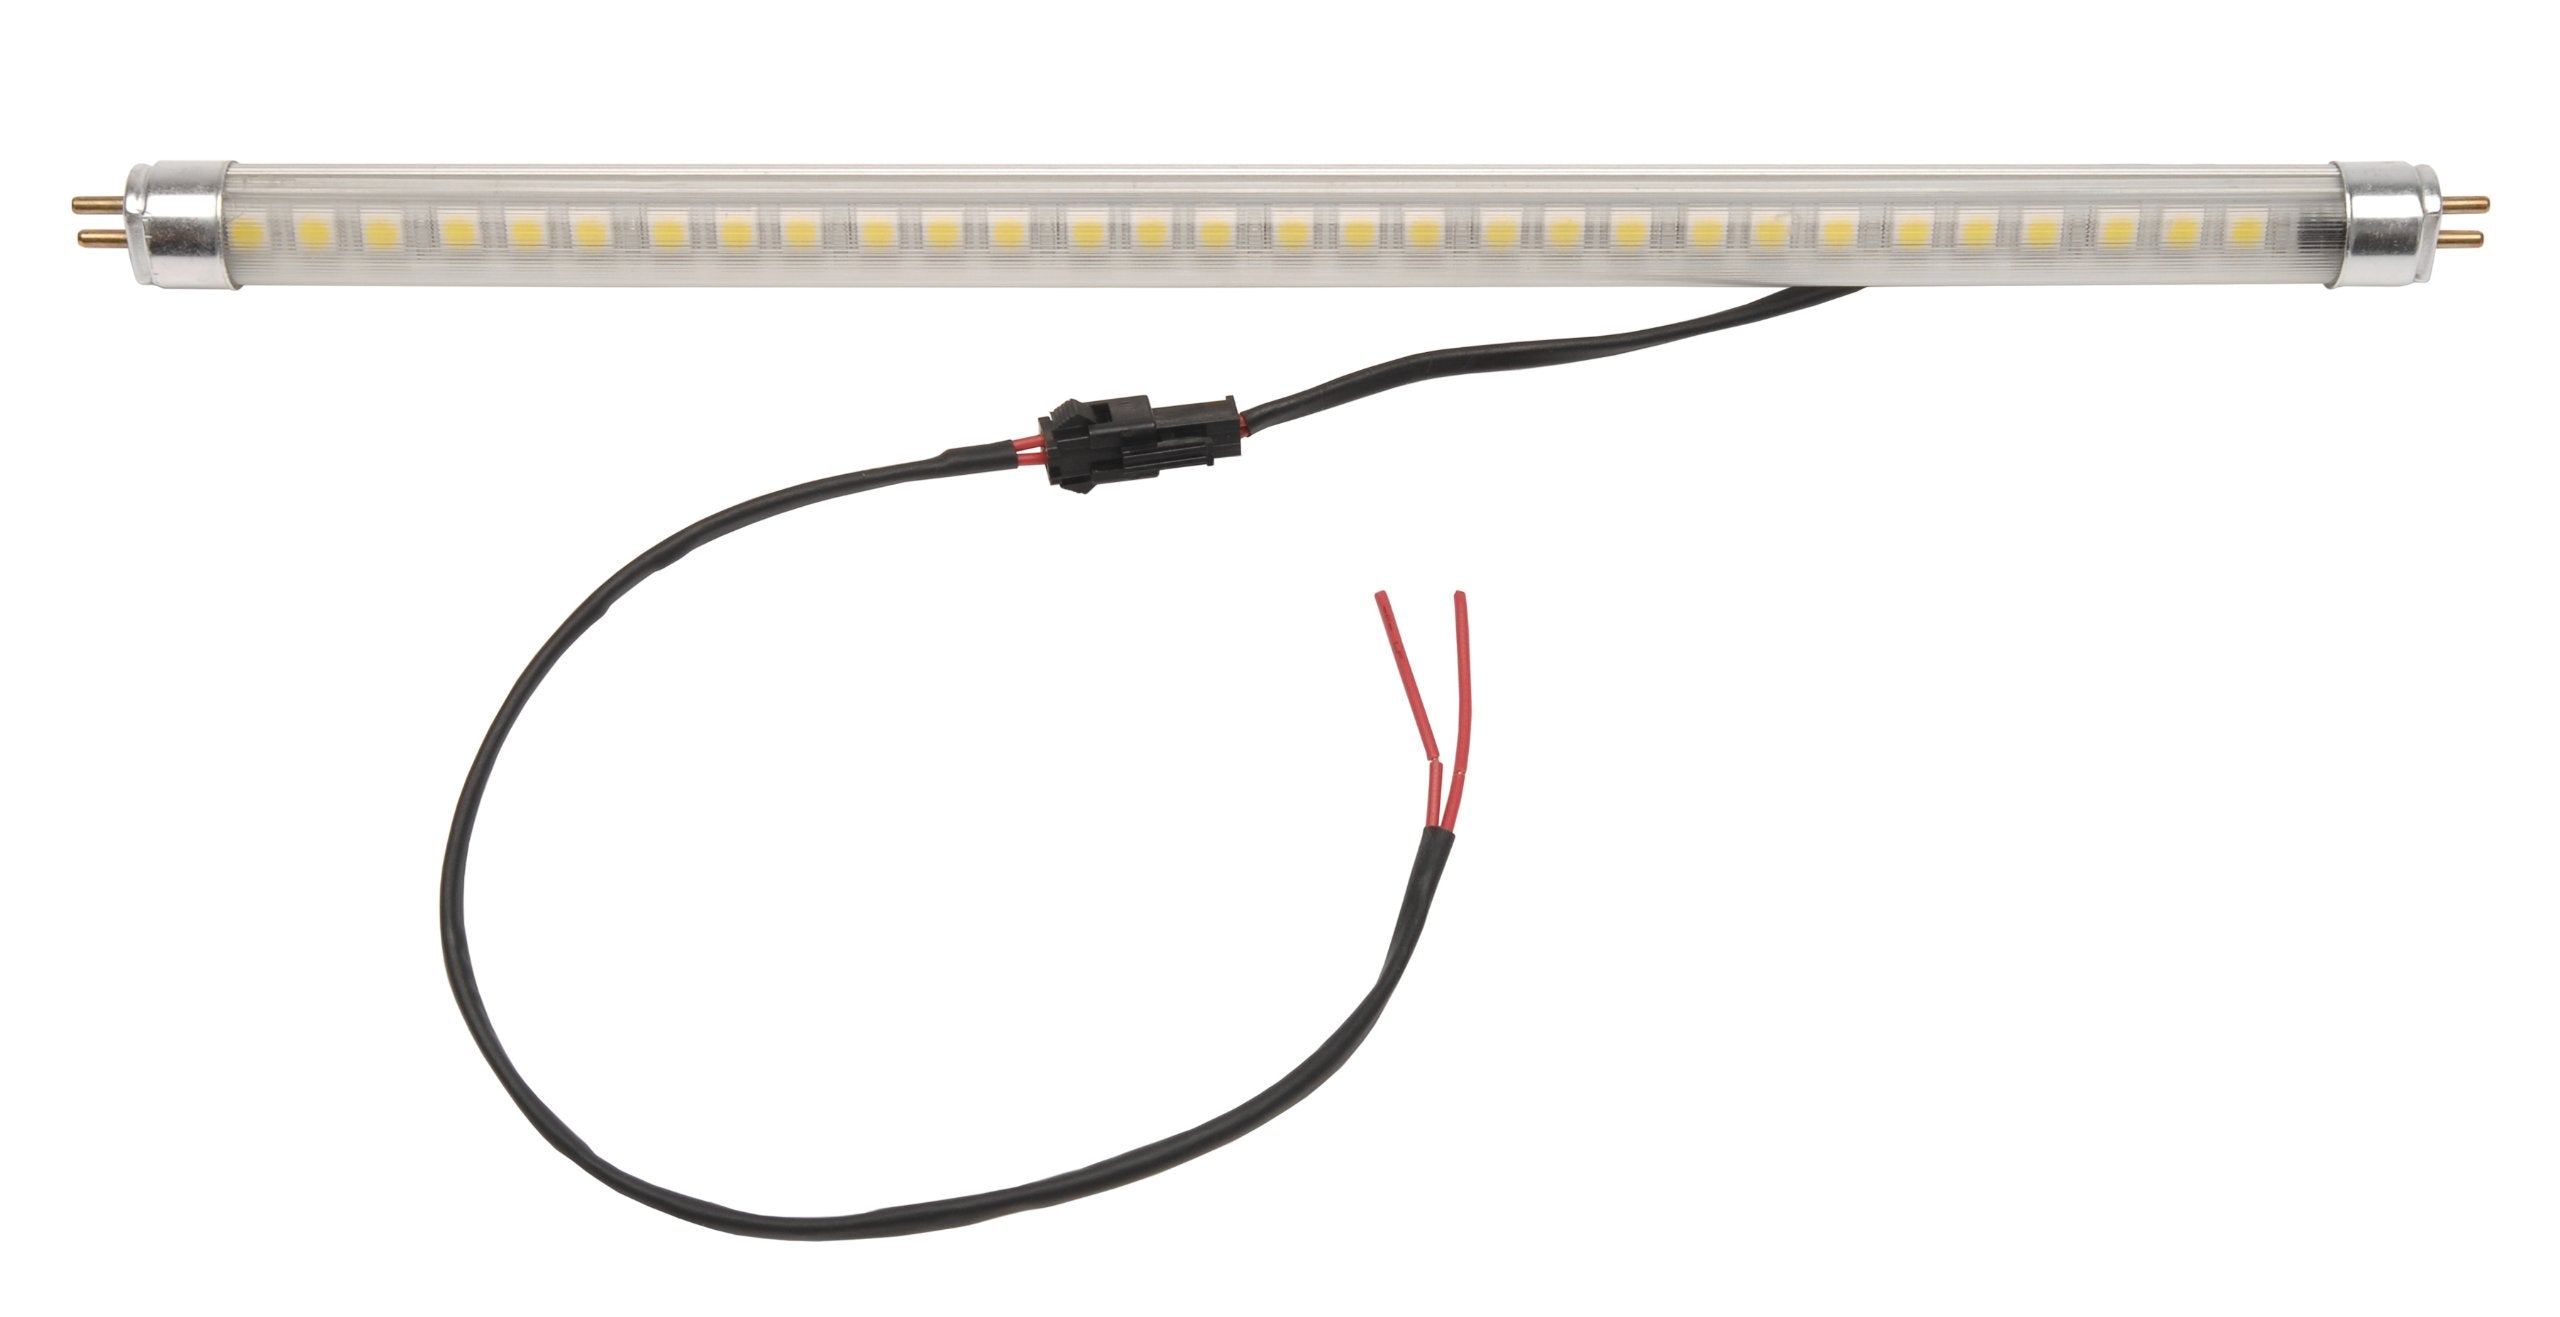 Starlights T5-12 12-Inch Fluorescent Tube LED Replacement with Harness Ballast Bypass